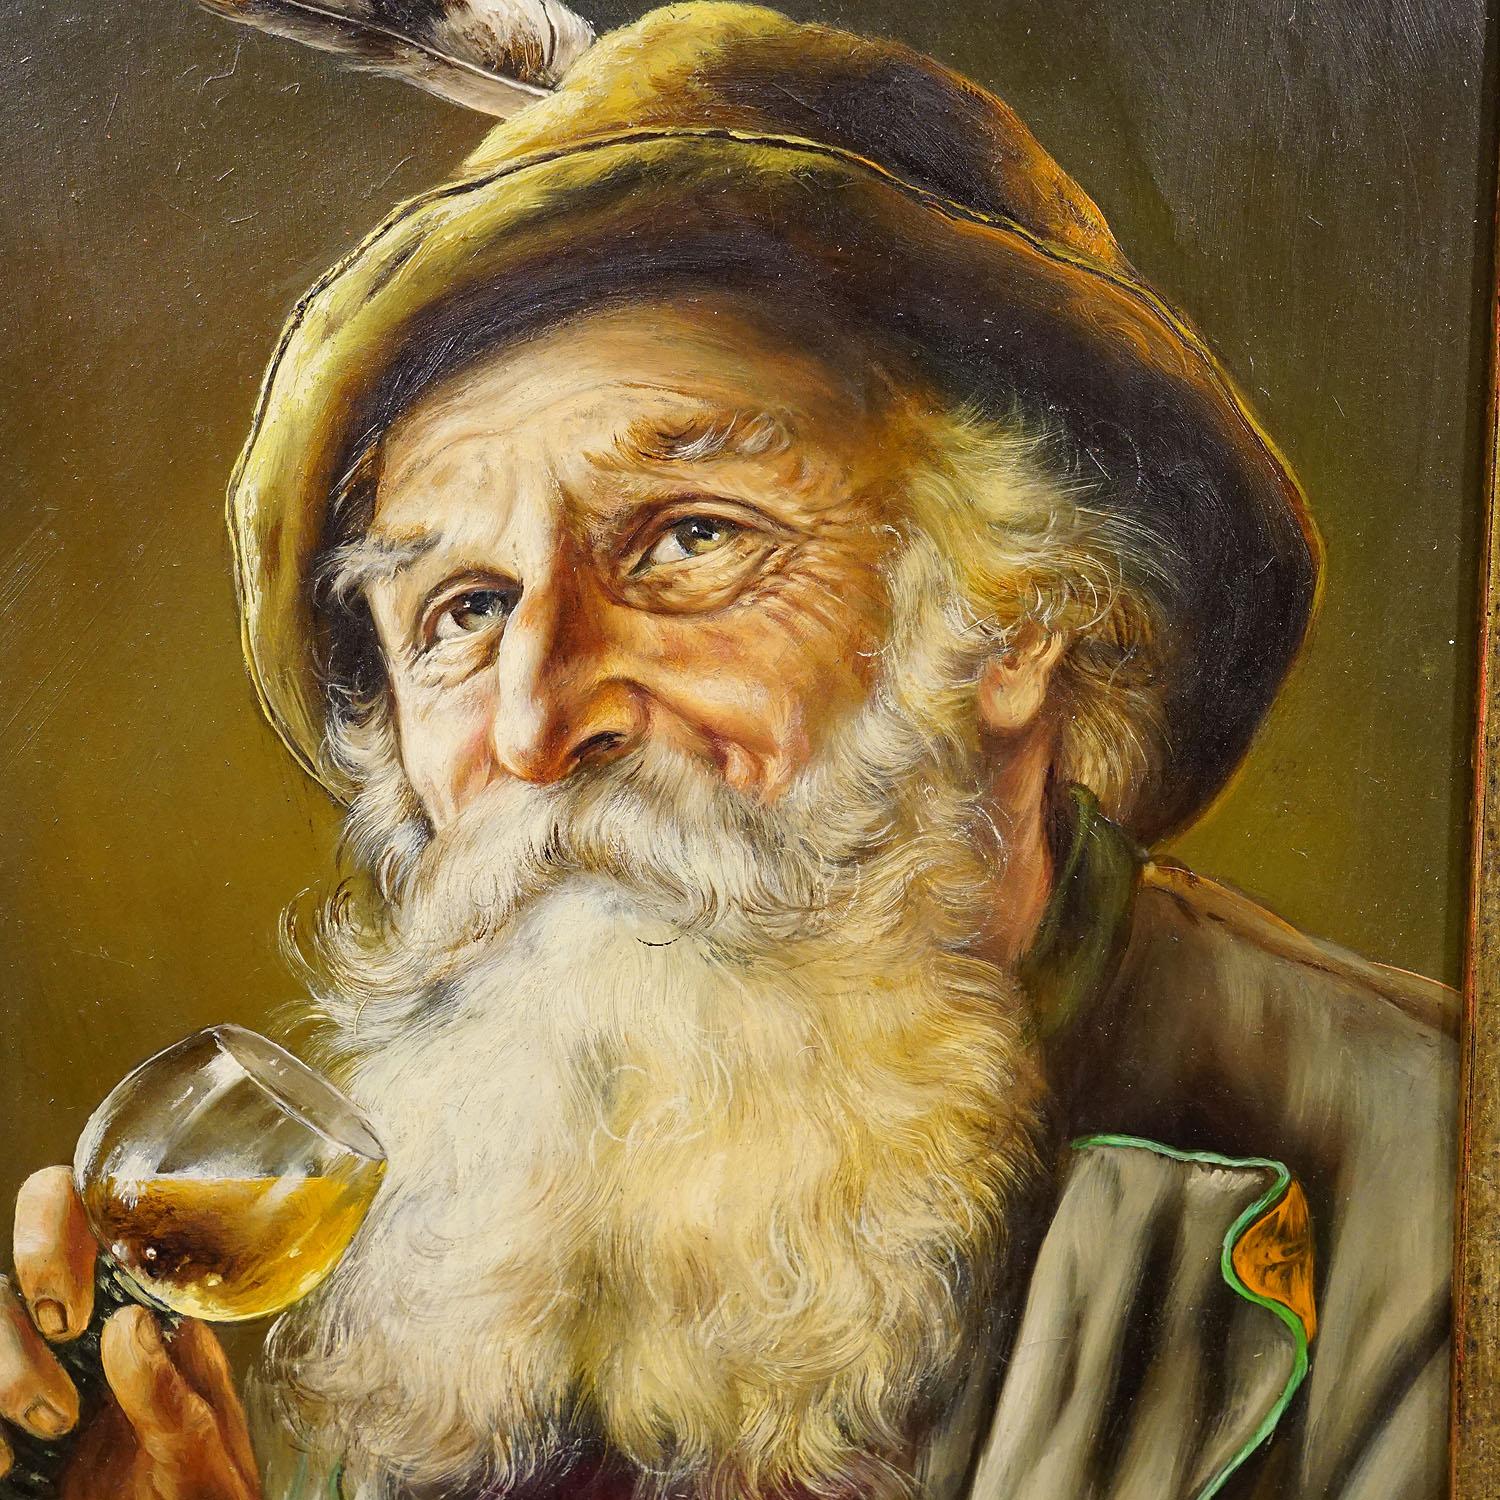 Painted J. Gruber - Portrait of a Bavarian Folksy Man with Wine Glass, Oil on Wood For Sale